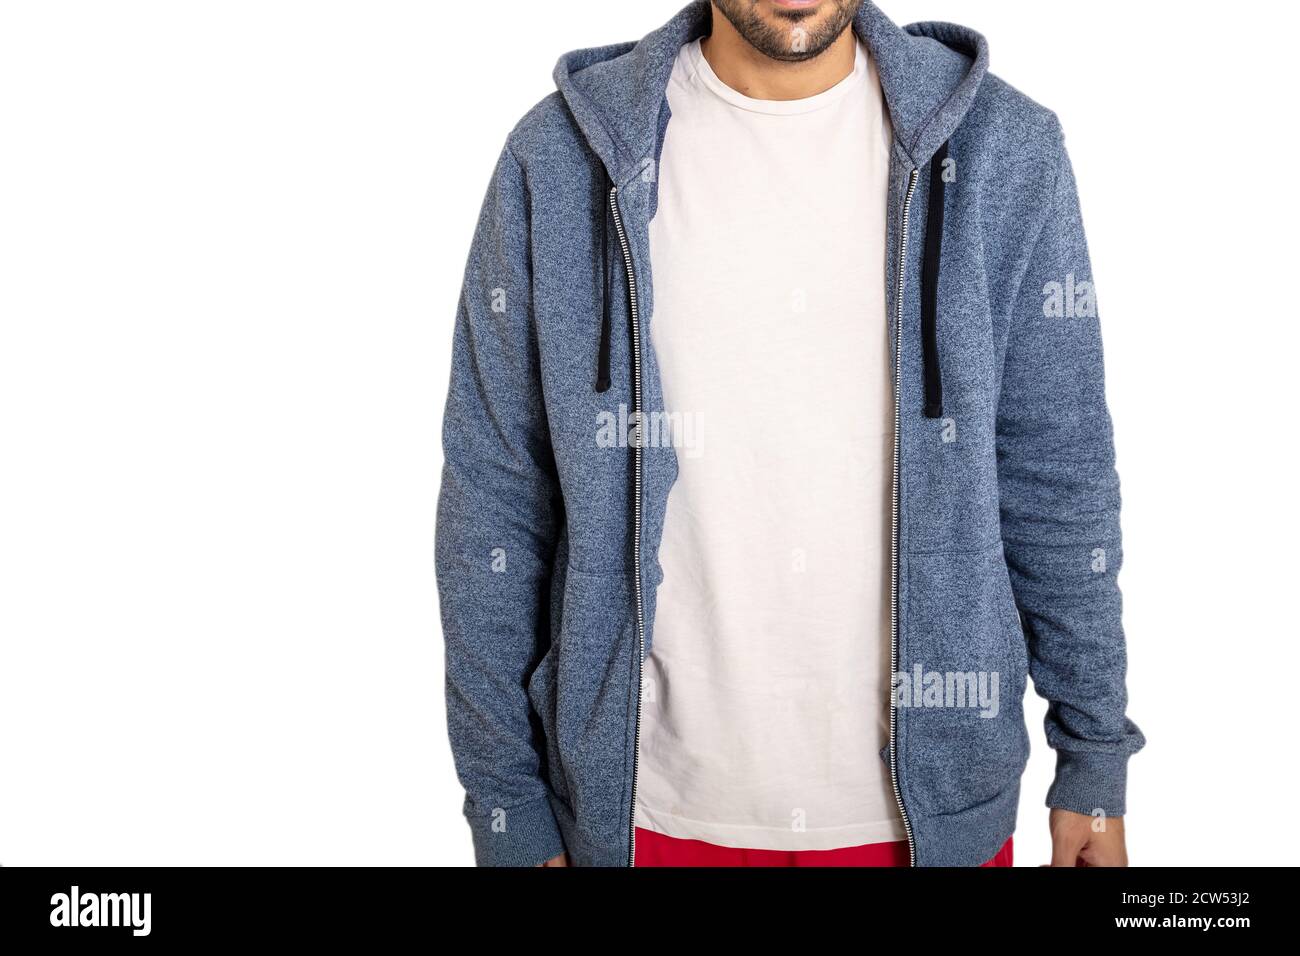 Young man wearing a blank t shirt and a gray blue color hoodie isolated against white background, closeup view. Casual male apparel, advertise templat Stock Photo